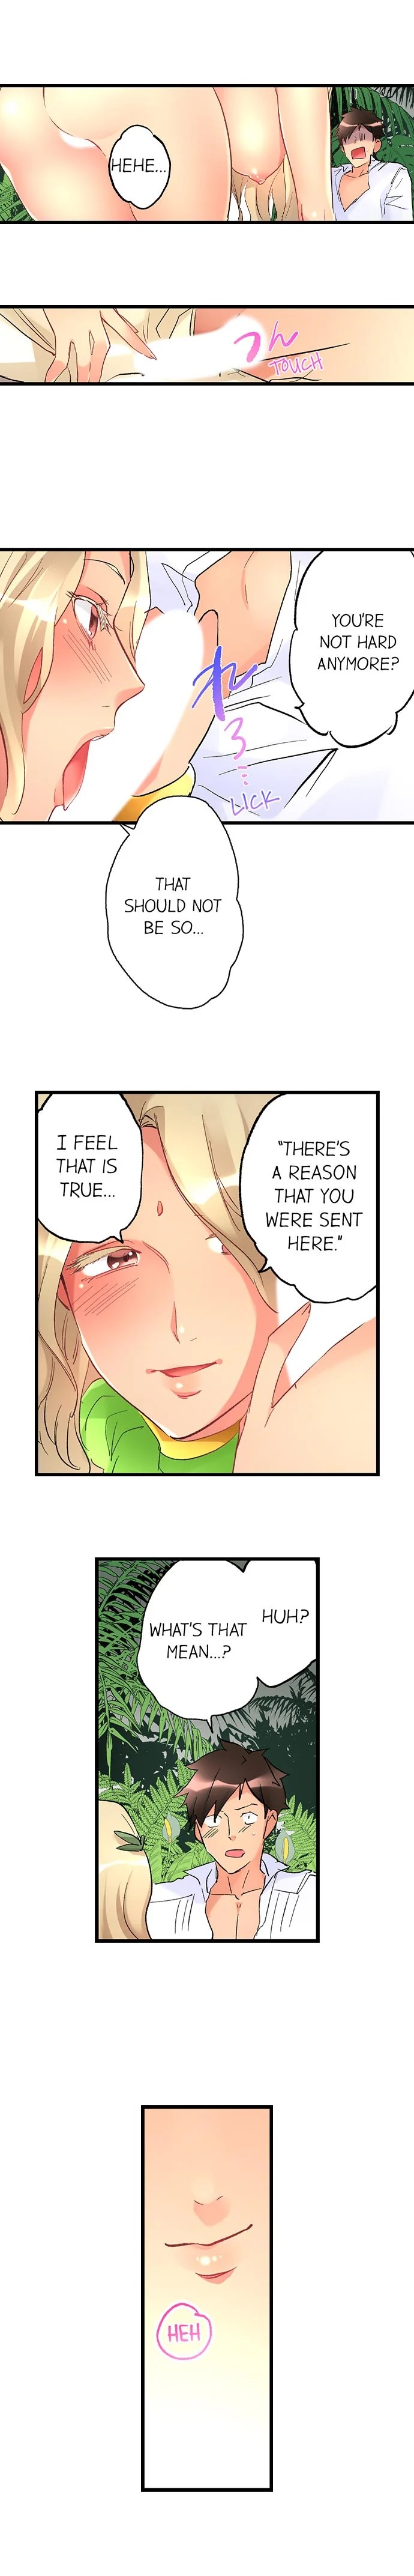 What She Fell On Was the Tip of My Dick - Chapter 60 Page 2